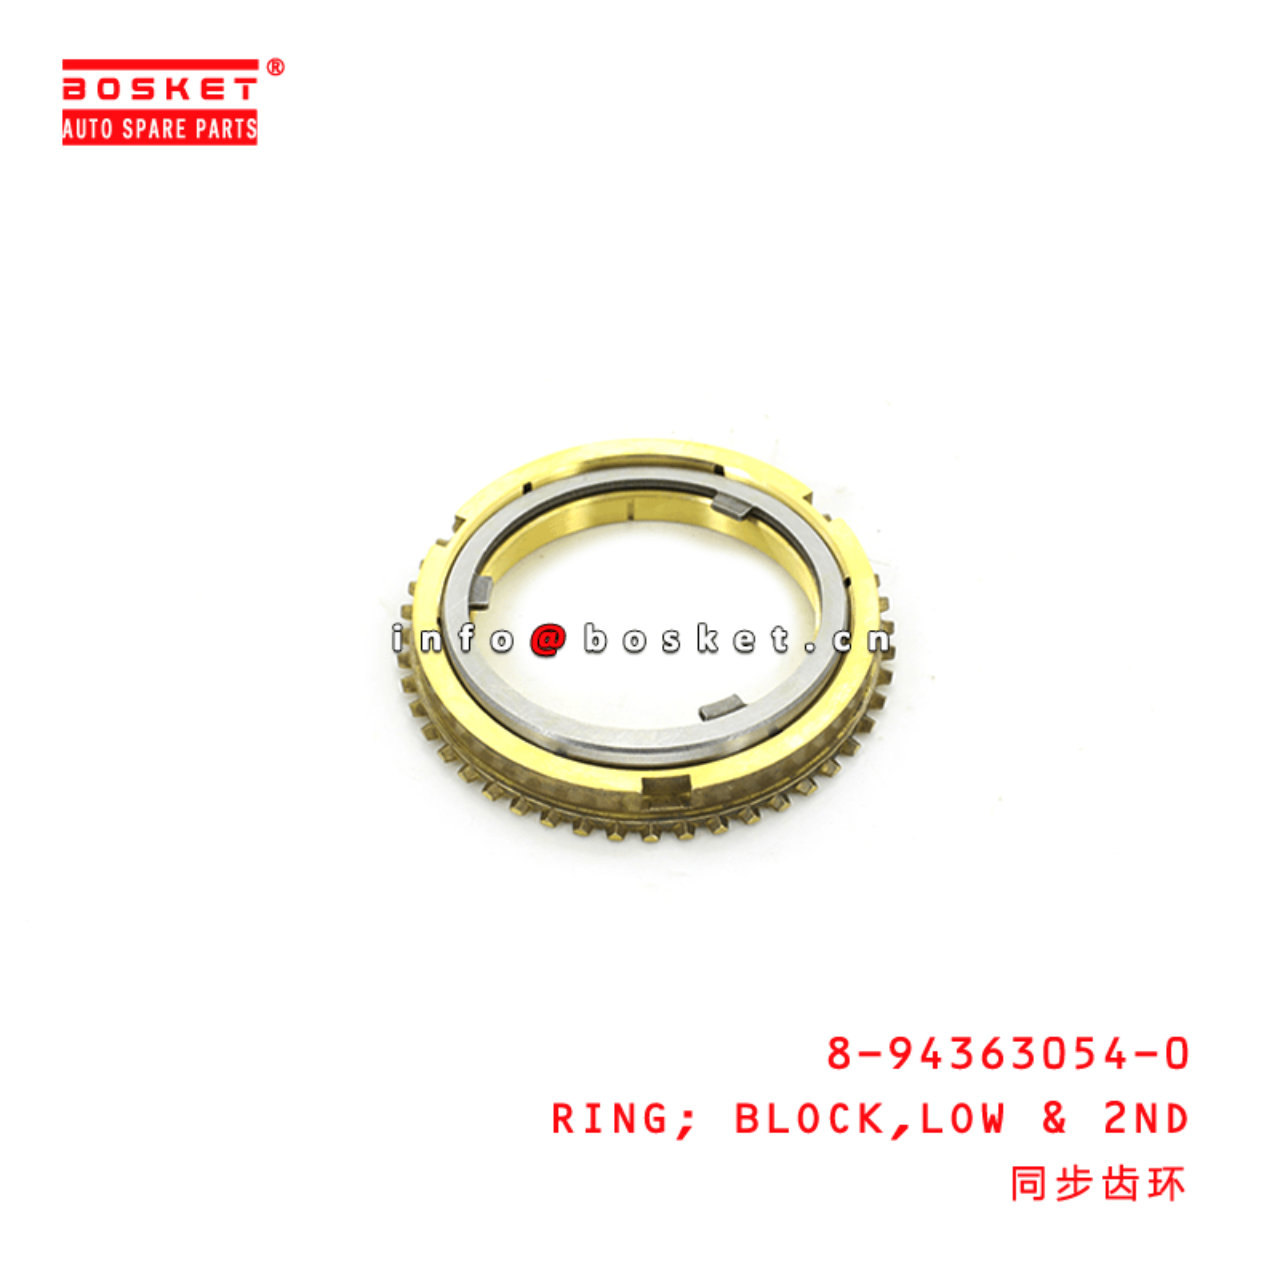 8-94363054-0 Low & Second Block Ring Suitable for ISUZU TFR17 4ZE1 8943630540